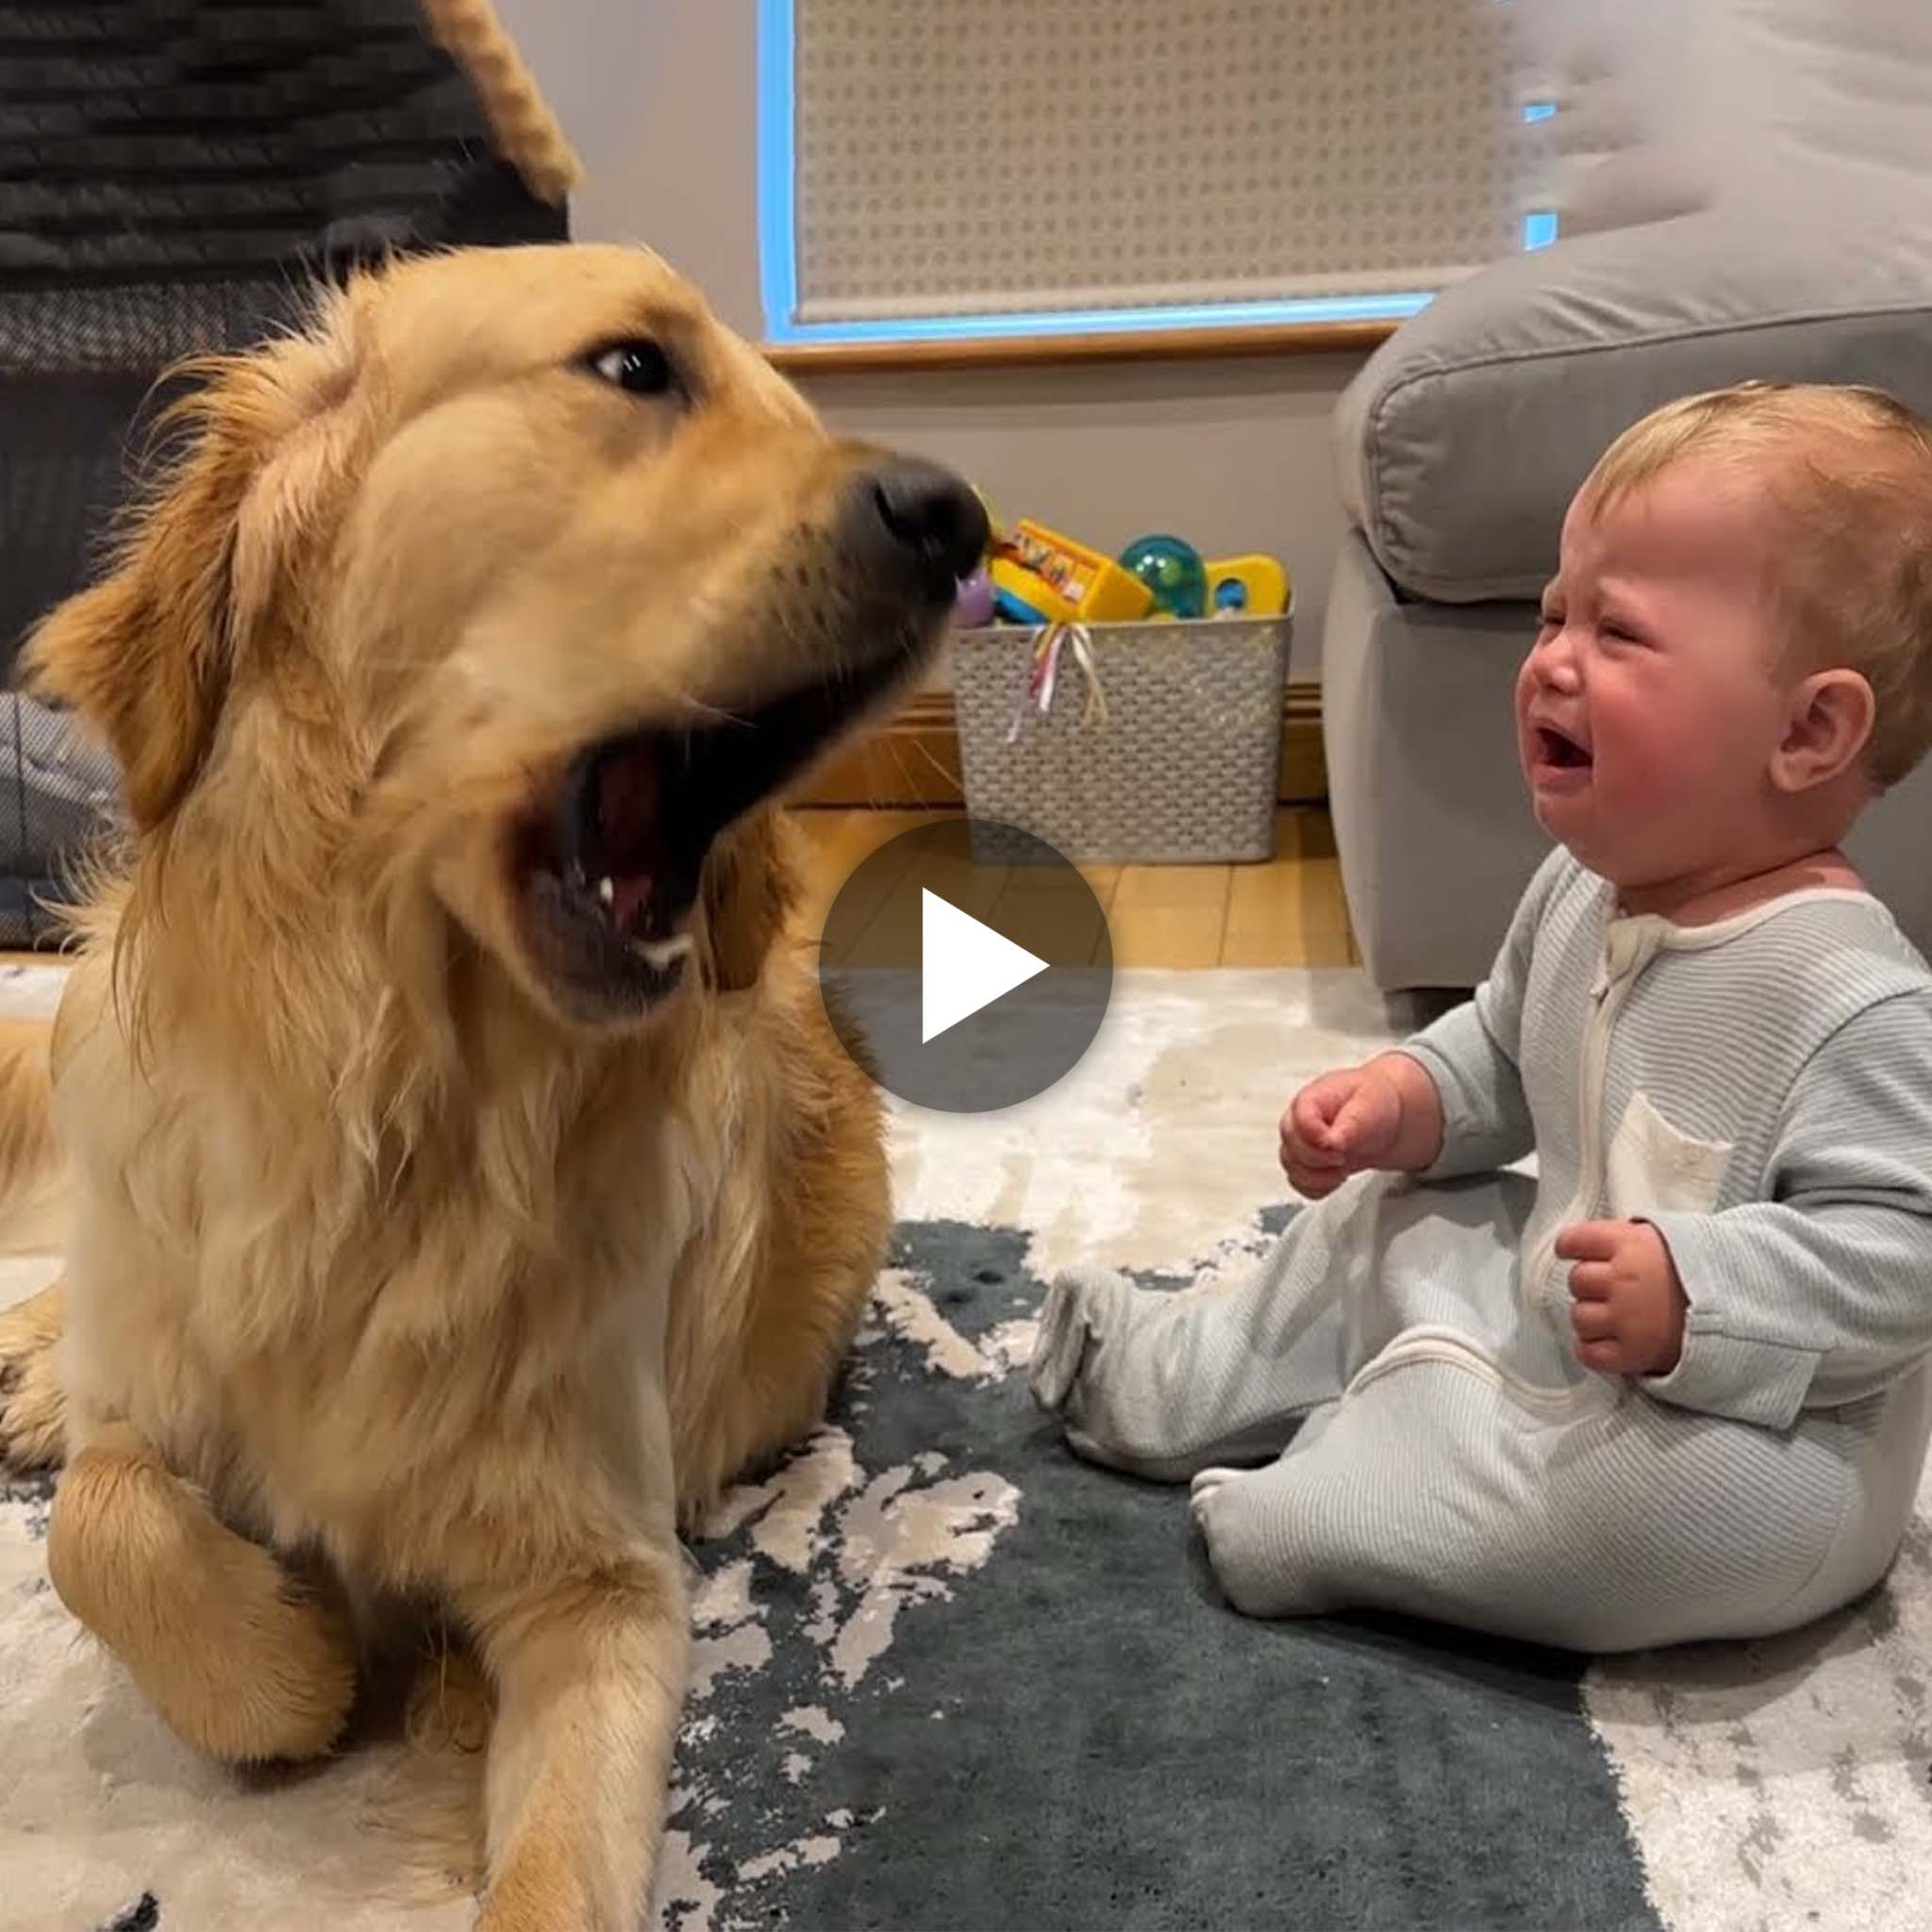 When a golden retriever puppy makes a baby cry, the dog apologizes! (Cutest Ever!!)